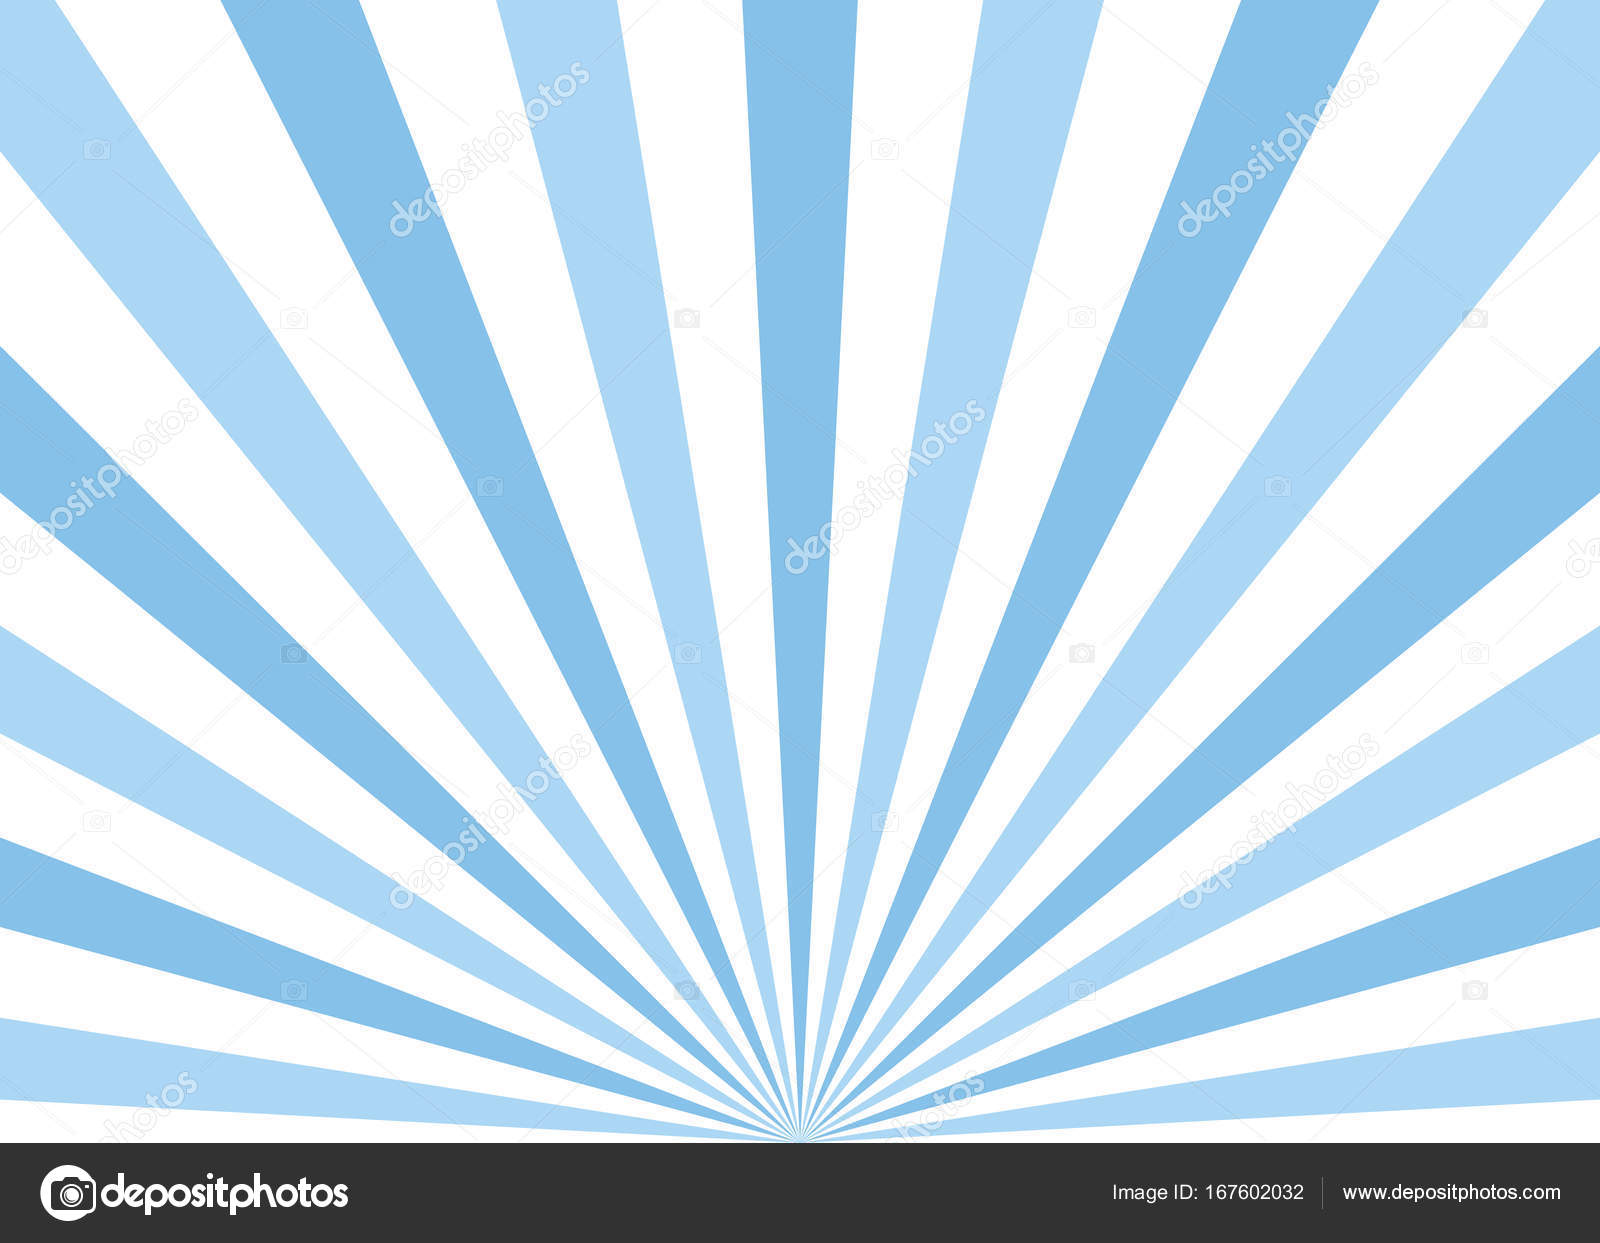 Abstract Blue Sun Rays Background Vector Image By C Brigada915 Gmail Com Vector Stock